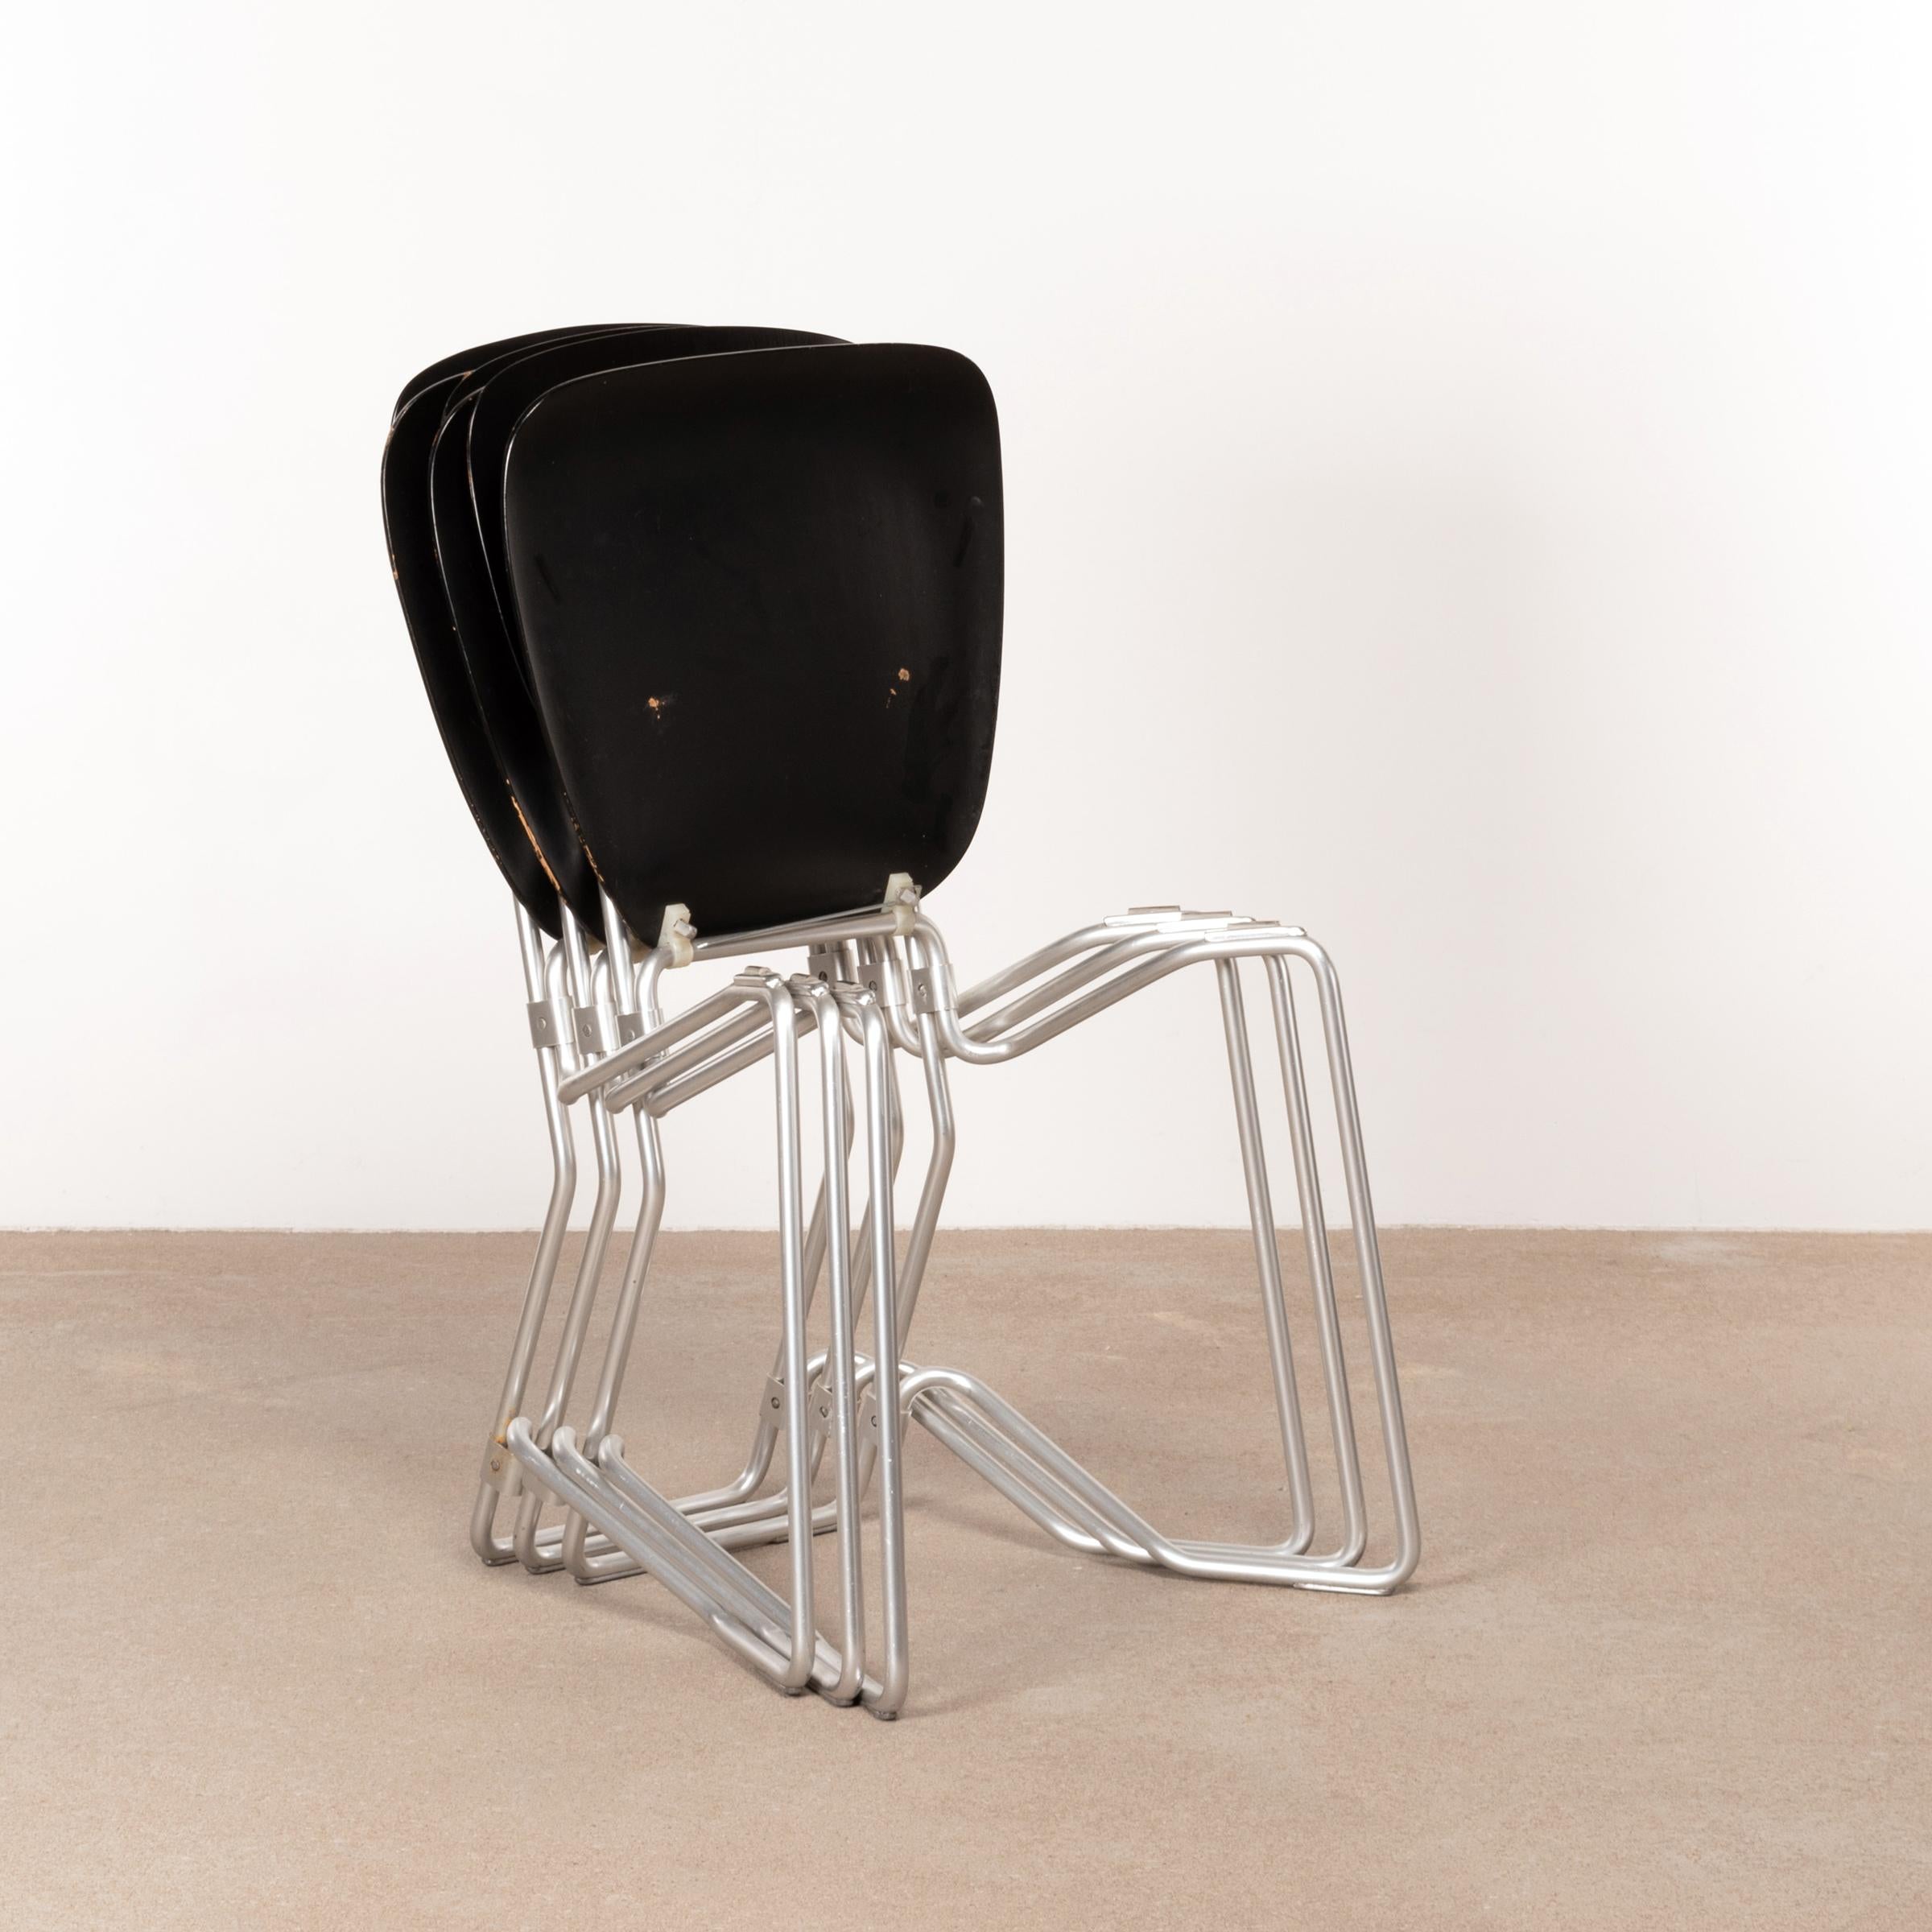 Armin Wirth folding / stacking chair for Aluflex Switzerland designed in 1951. Early production with a smart constructed lightweight frame of aluminum and black dyed plywood seats all in good original condition with traces of use.